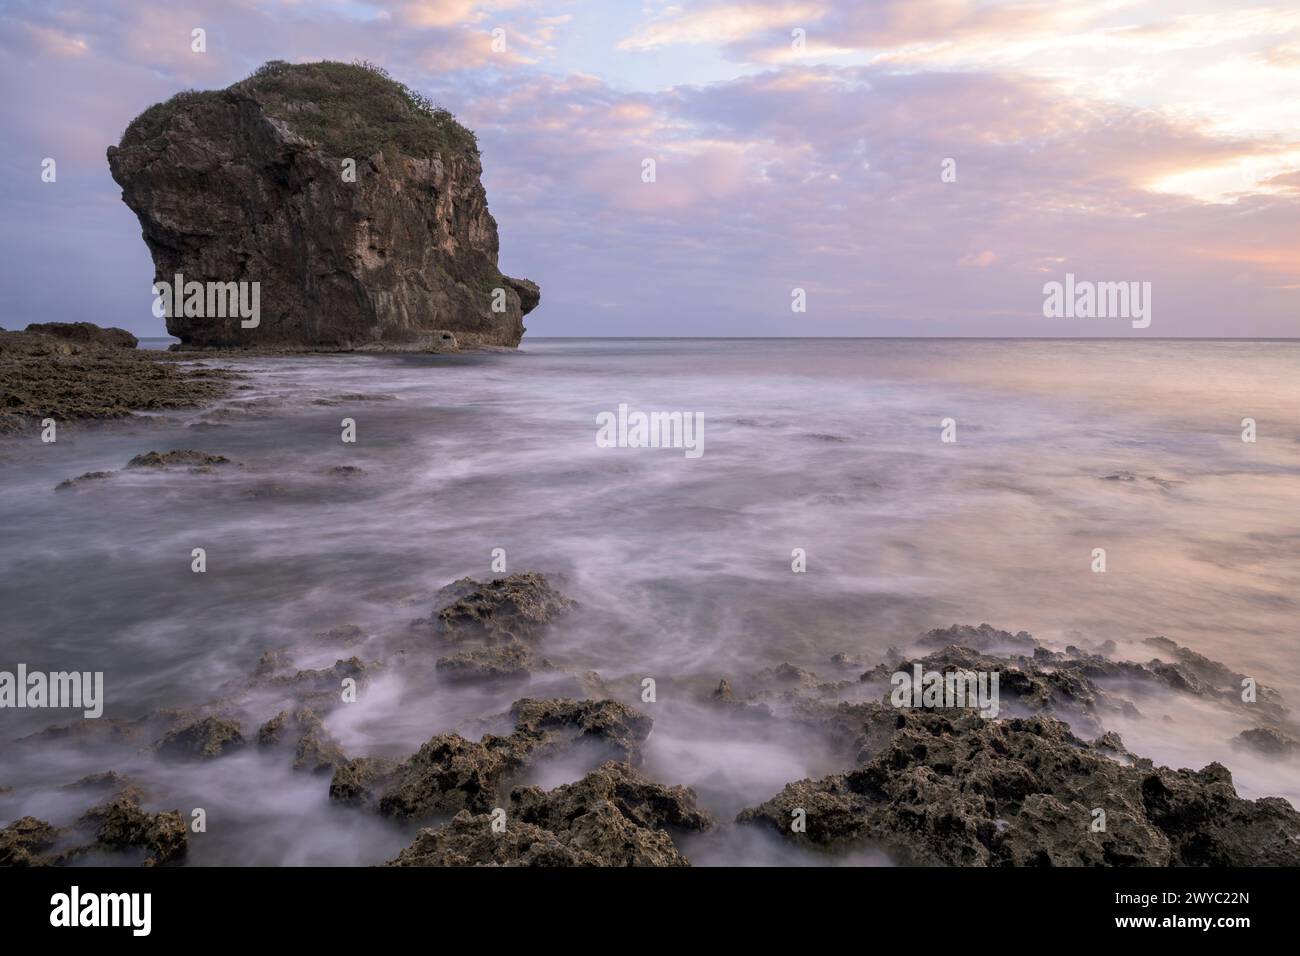 A serene sunset with a rocky outcrop standing tall amid a silky sea with a long exposure effect Stock Photo